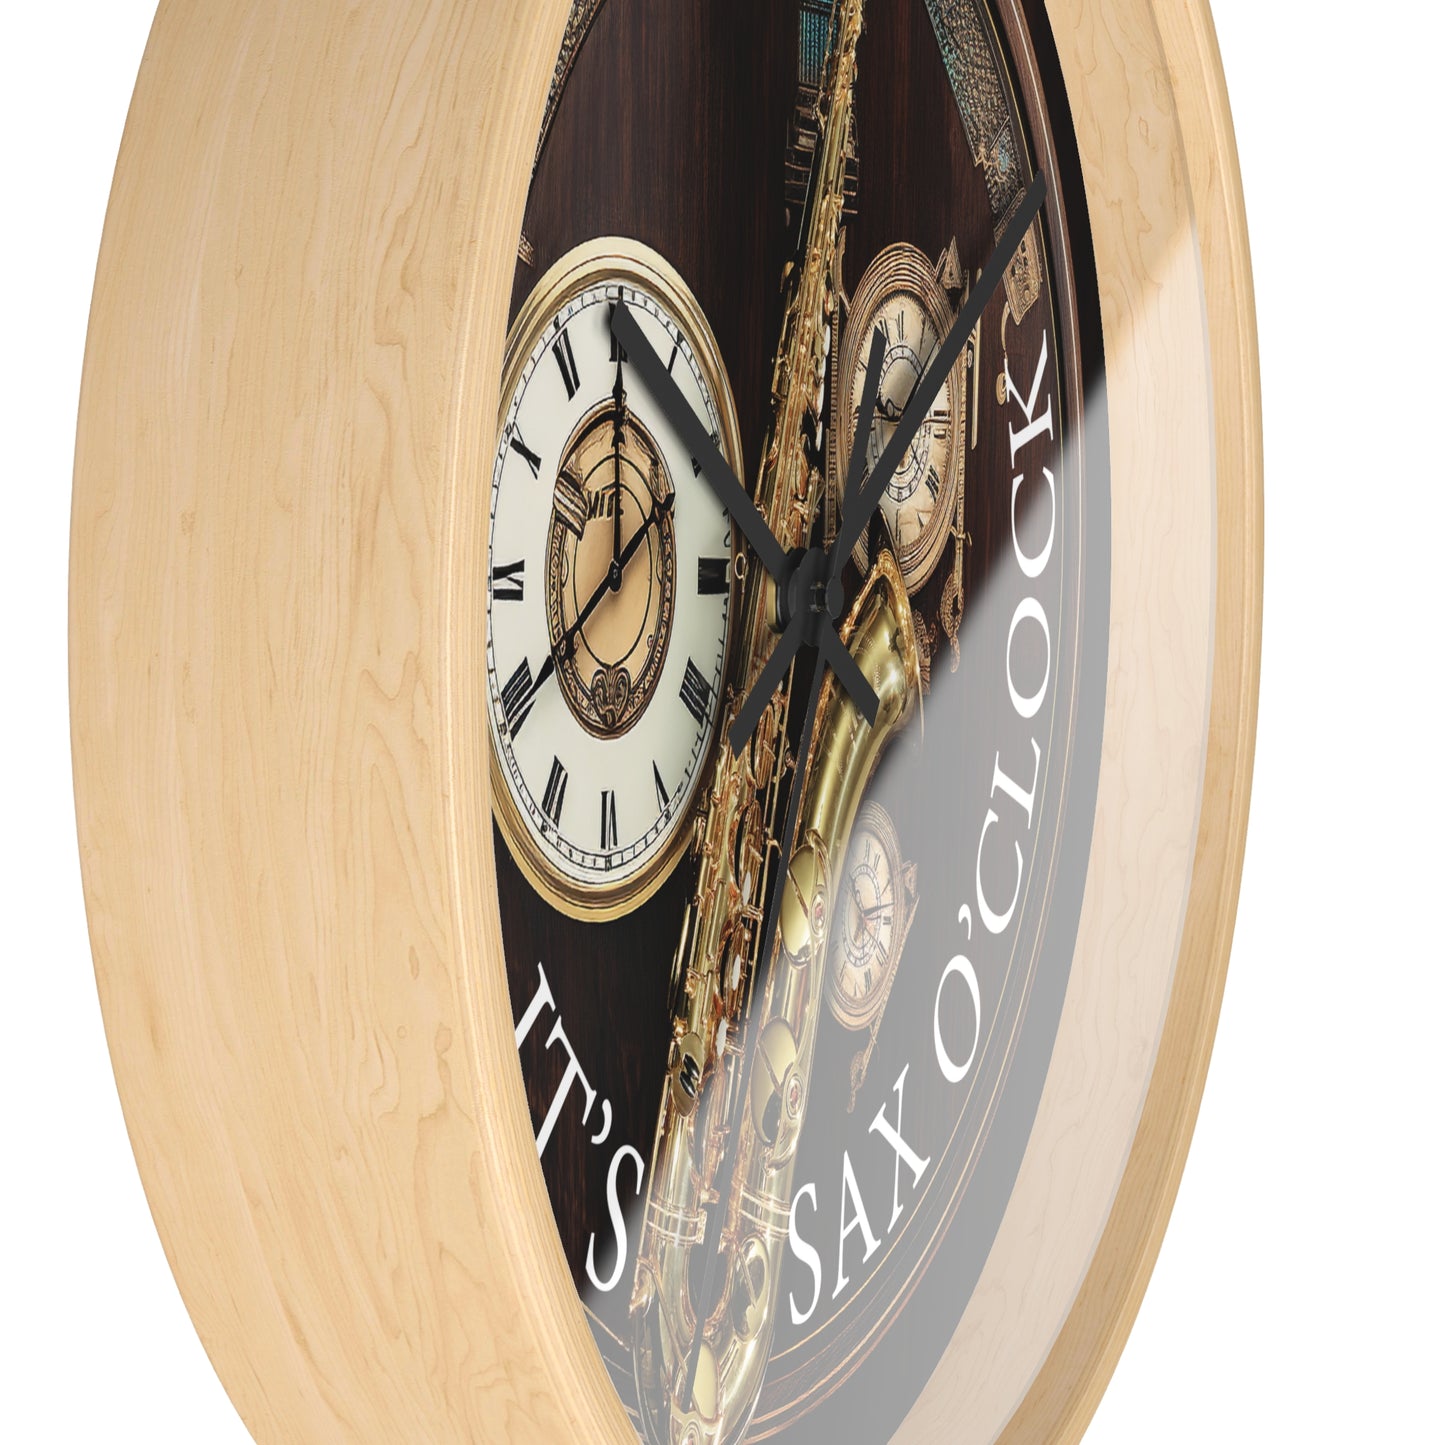 It's SAX O'CLOCK  music-themed 10" Wall Clock with saxophone, 2" light wood frame with plexiglass